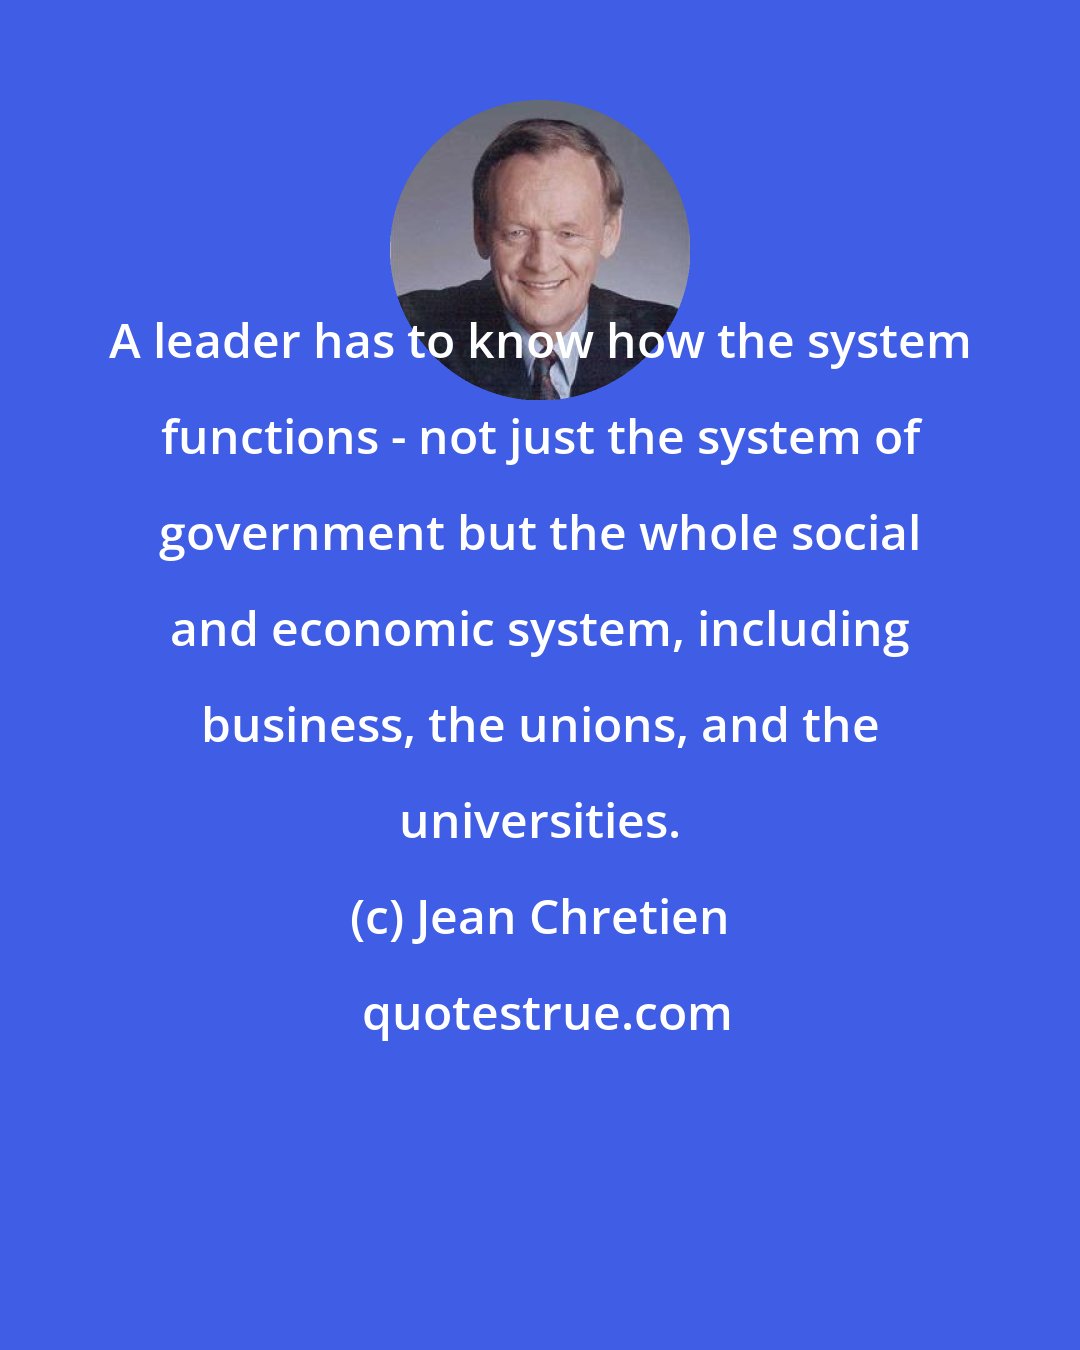 Jean Chretien: A leader has to know how the system functions - not just the system of government but the whole social and economic system, including business, the unions, and the universities.